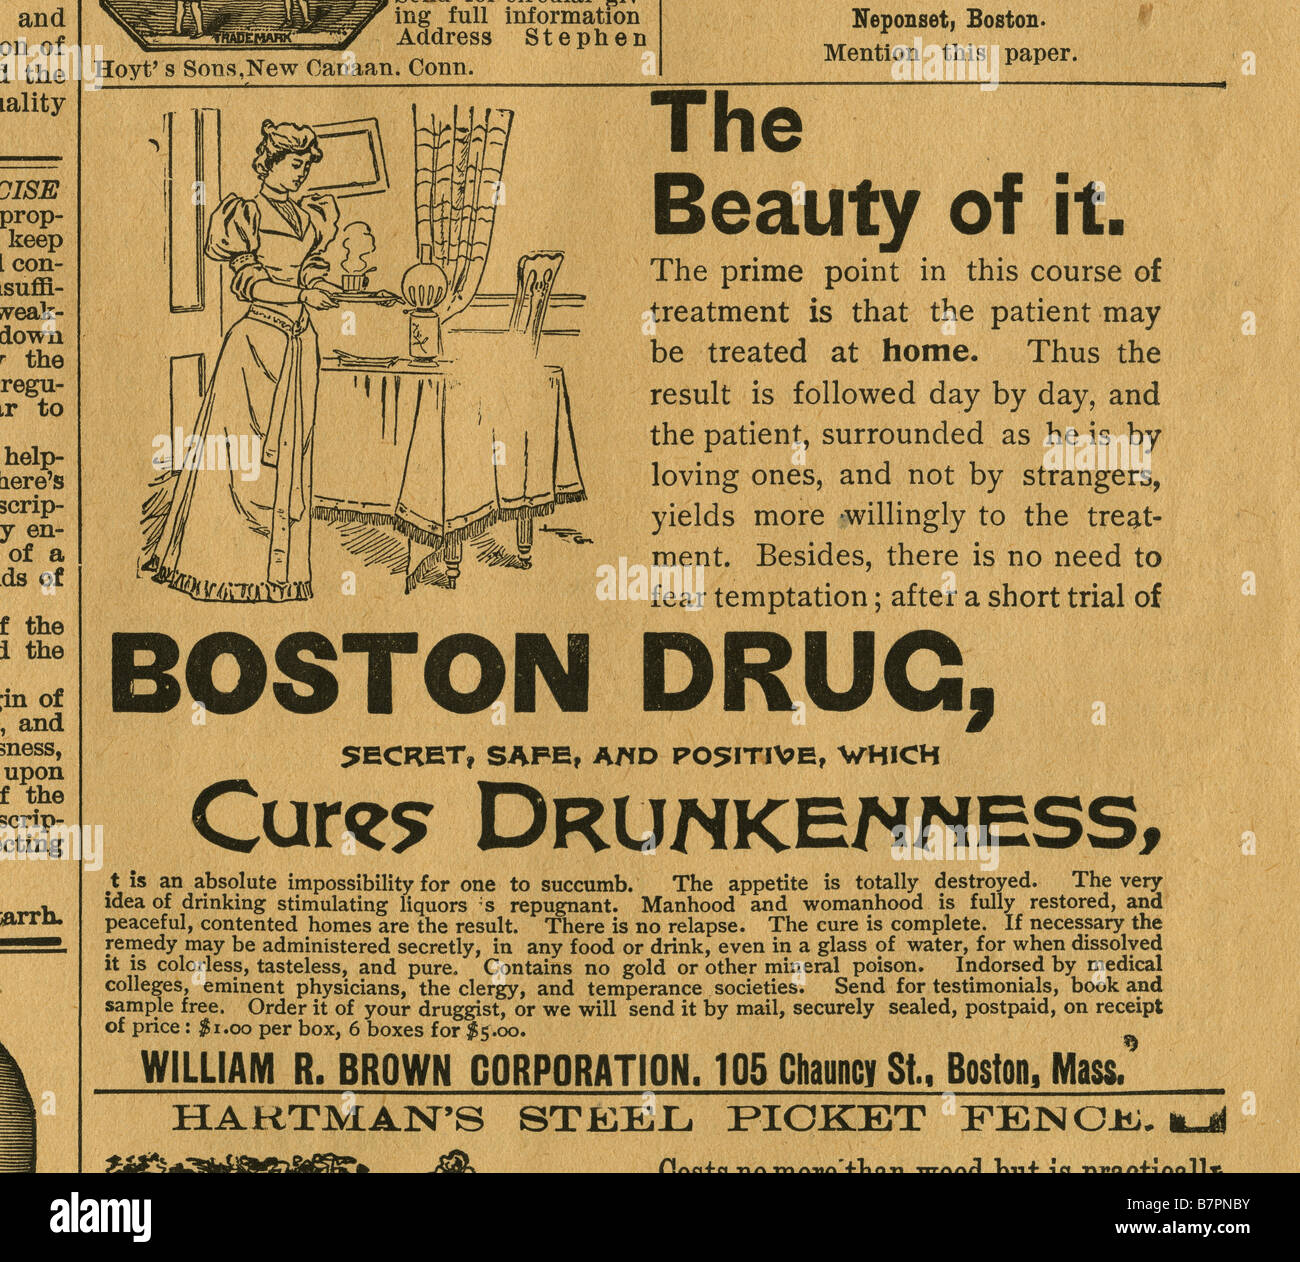 1893 antique newspaper advertisement for Boston Drug which cures drunkenness by William R. Brown Corp. of Boston, Massachusetts. Stock Photo